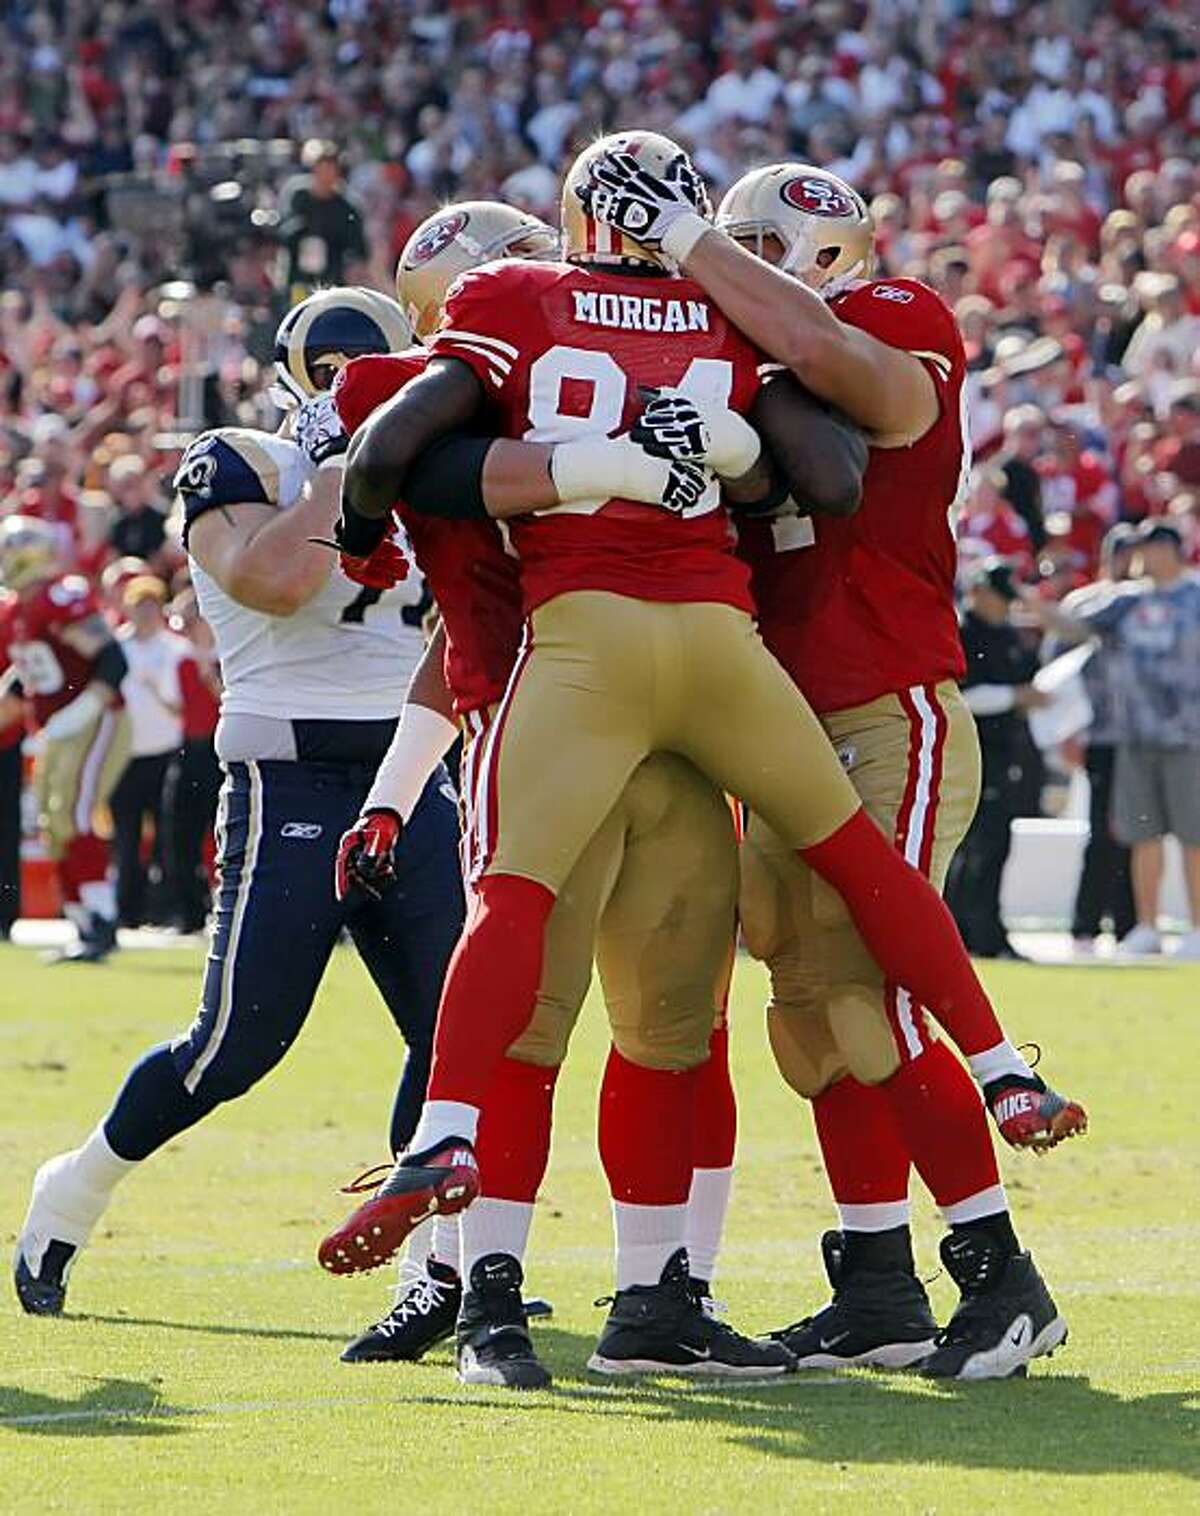 Josh Morgan celebrates his 65-yard reception with teammates in the first quarter against the Rams at Candlestick Park in San Francisco on Sunday. The catch led to a touchdown by Frank Gore.